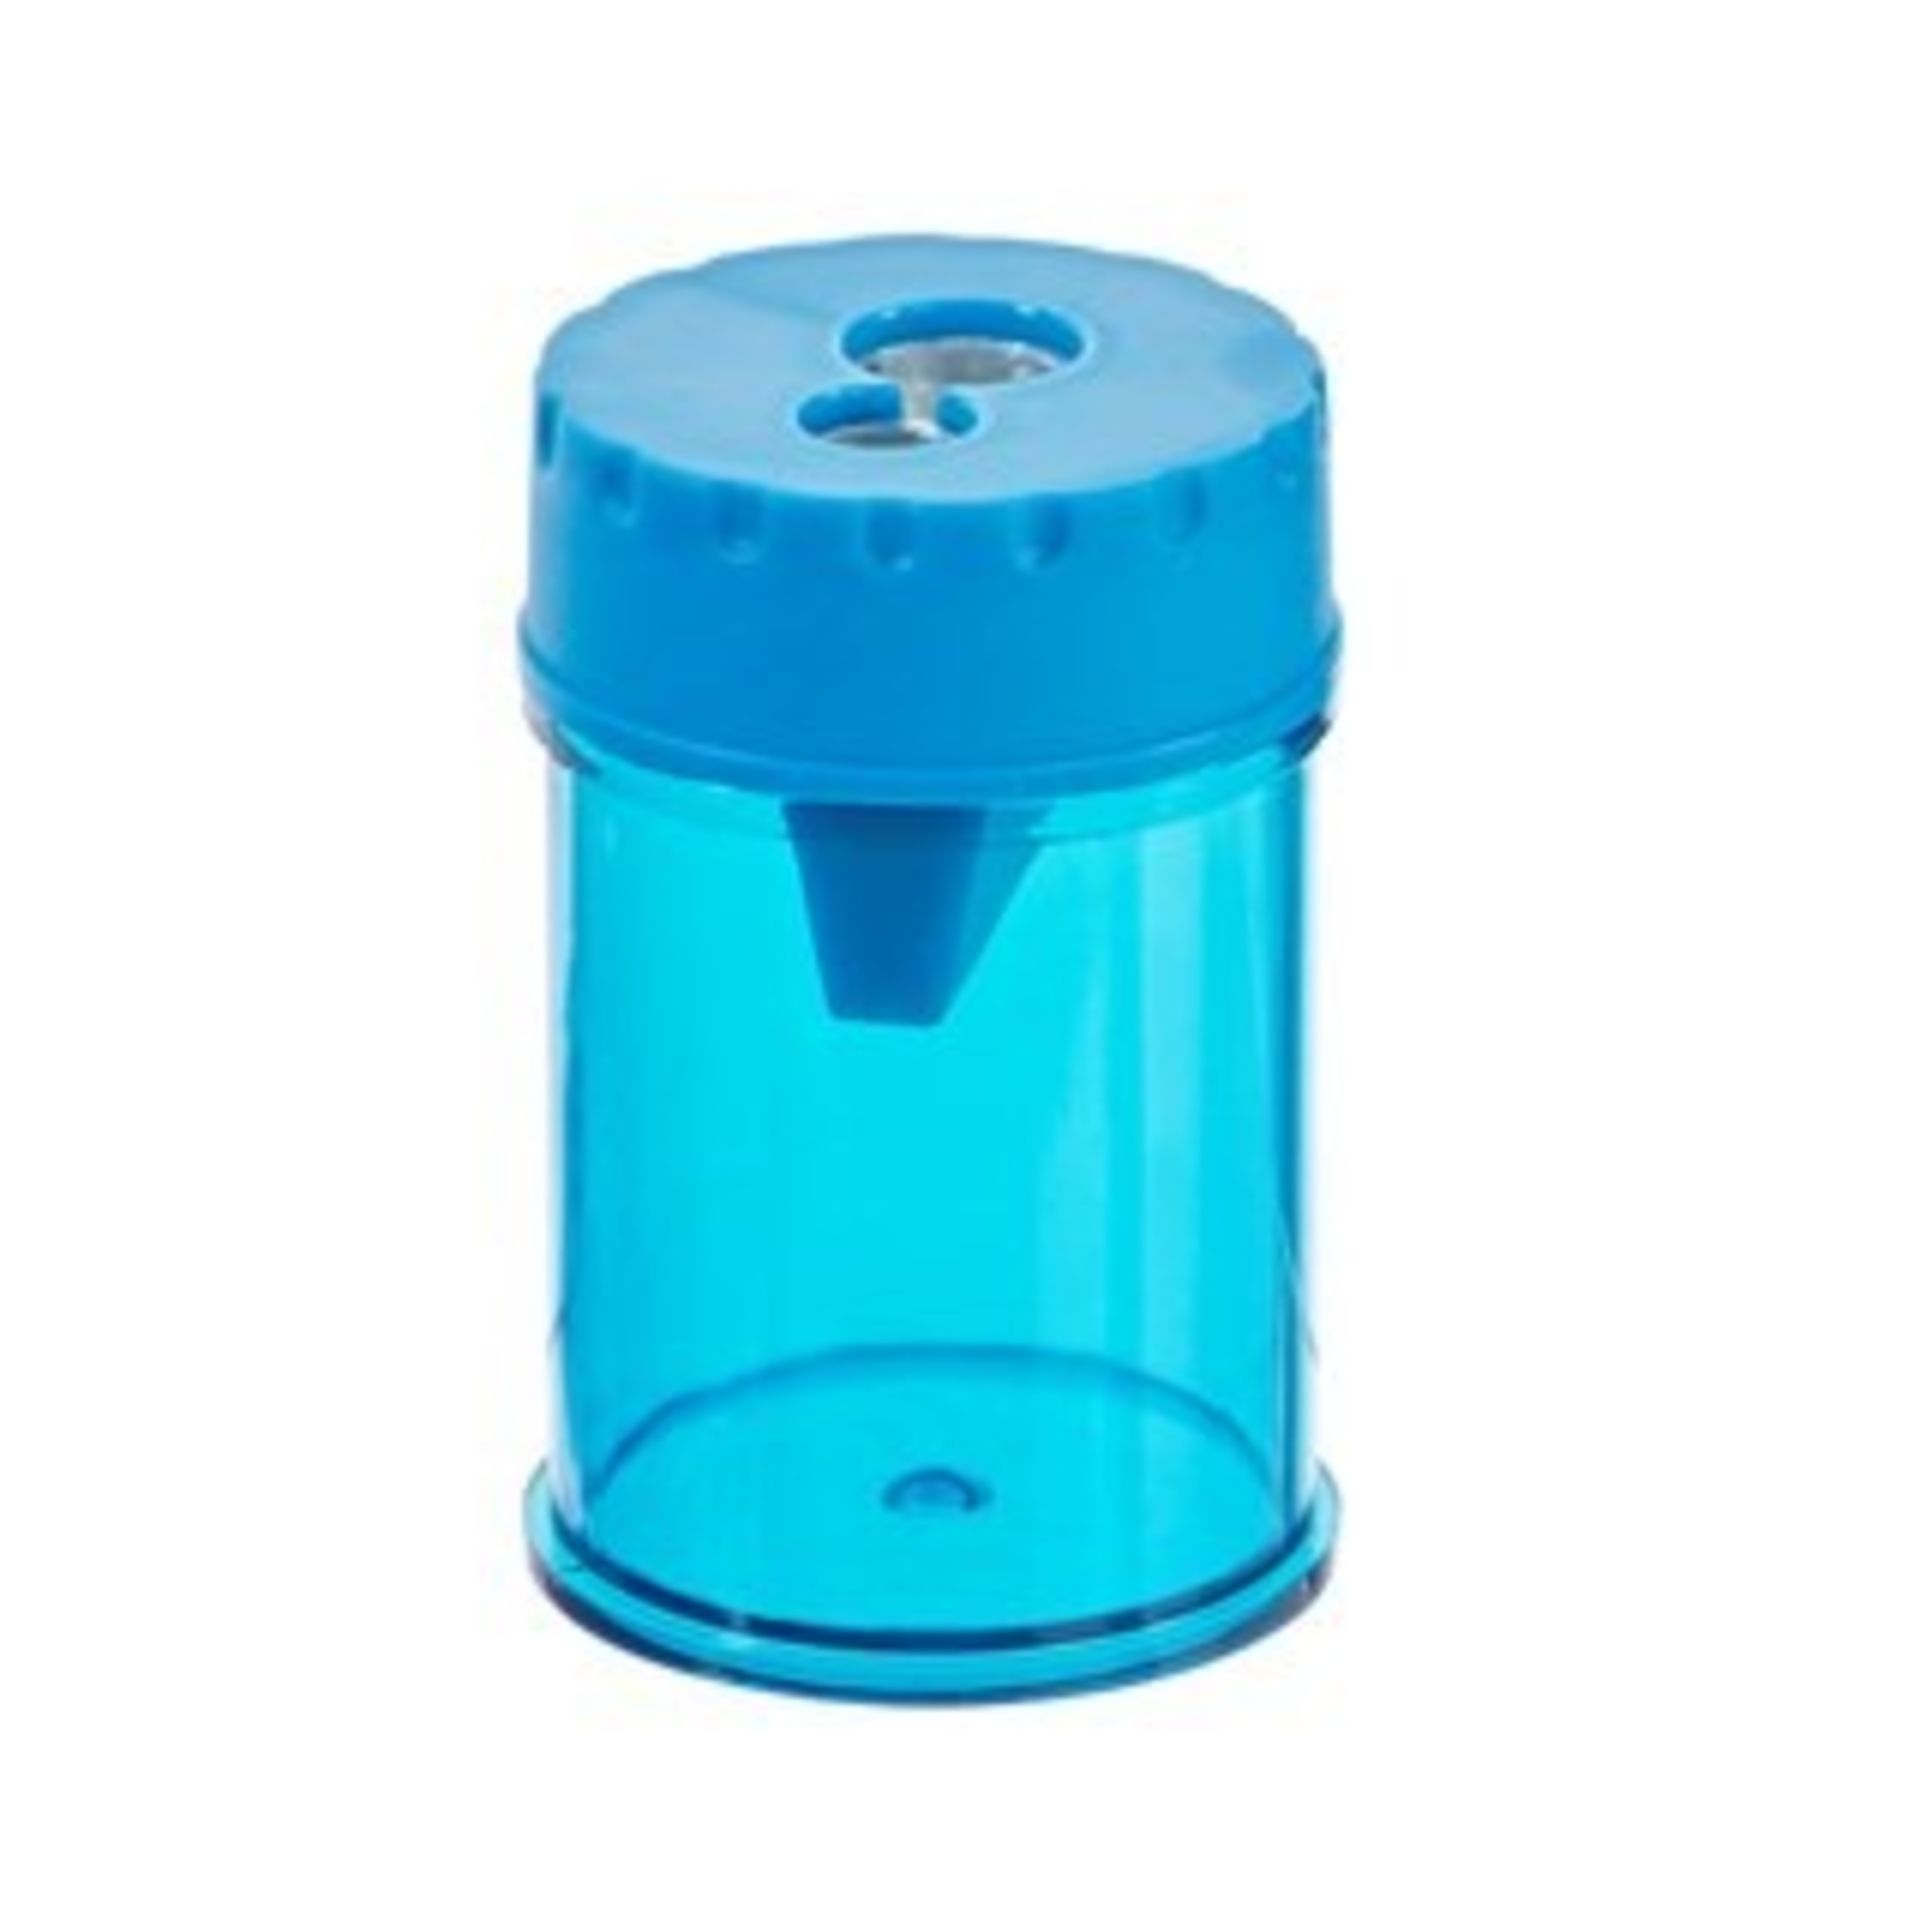 1 BOX OF CLASSMATES BARREL DOUBLE SHARPENER IN BLUE / 10 UNITS PER PACK / RRP £10.99 (VIEWING HIGHLY